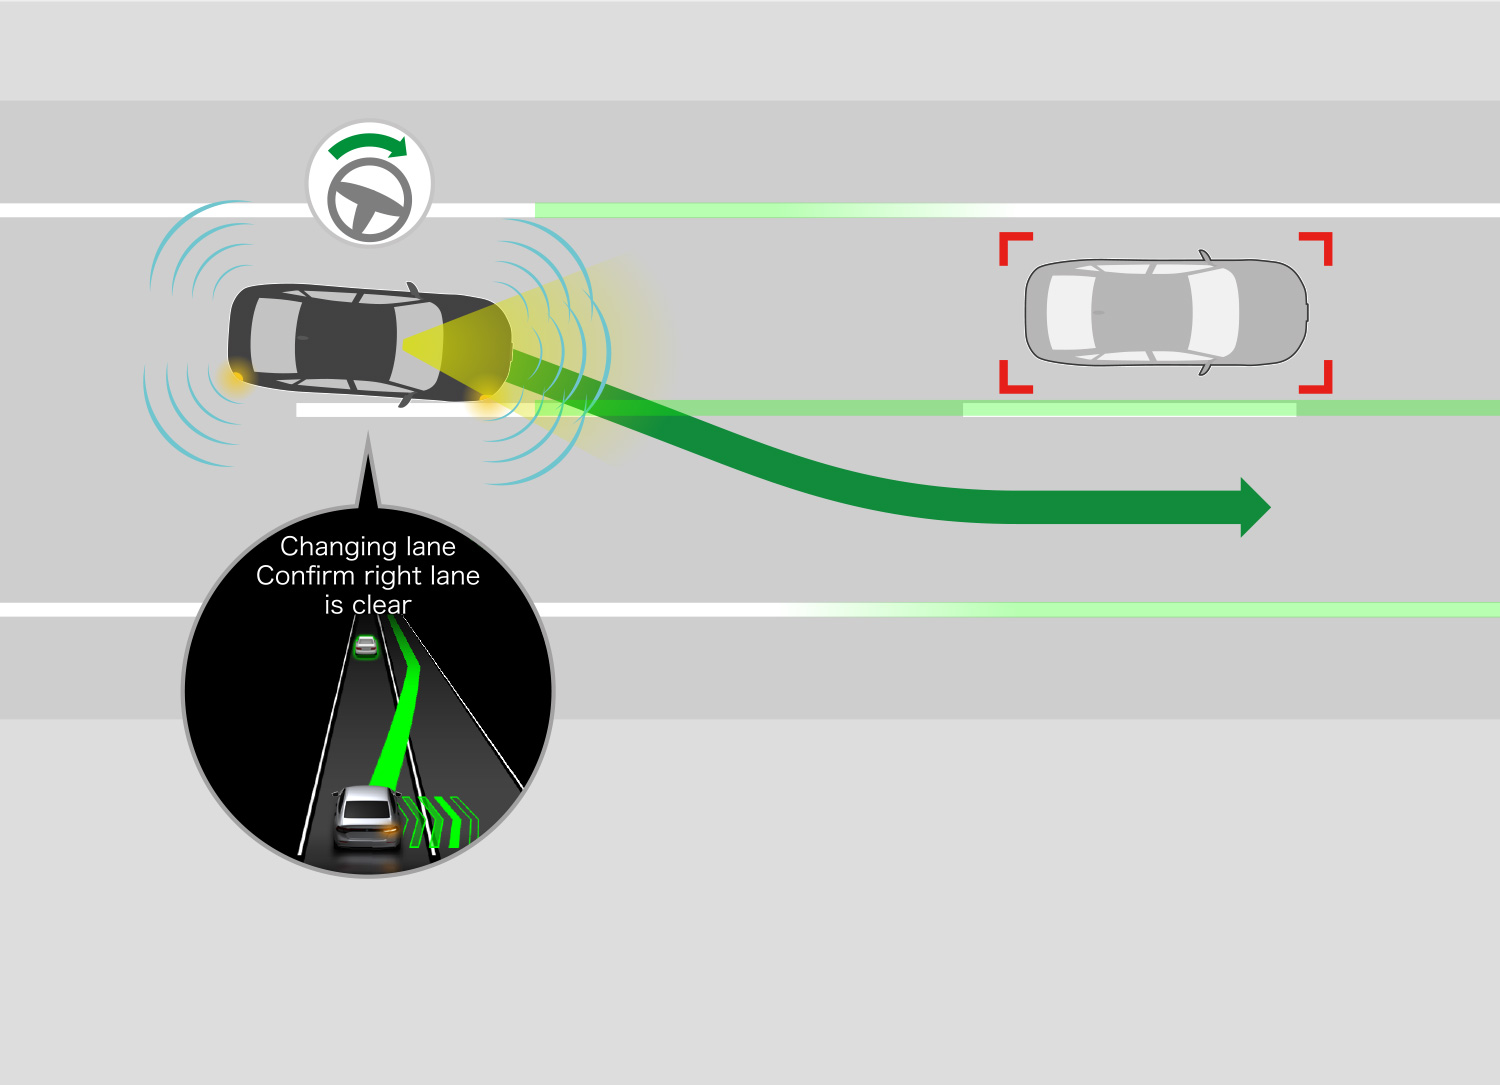 The system operates the turn signal, accelerator, brake pedal and steering wheel for the lane change.